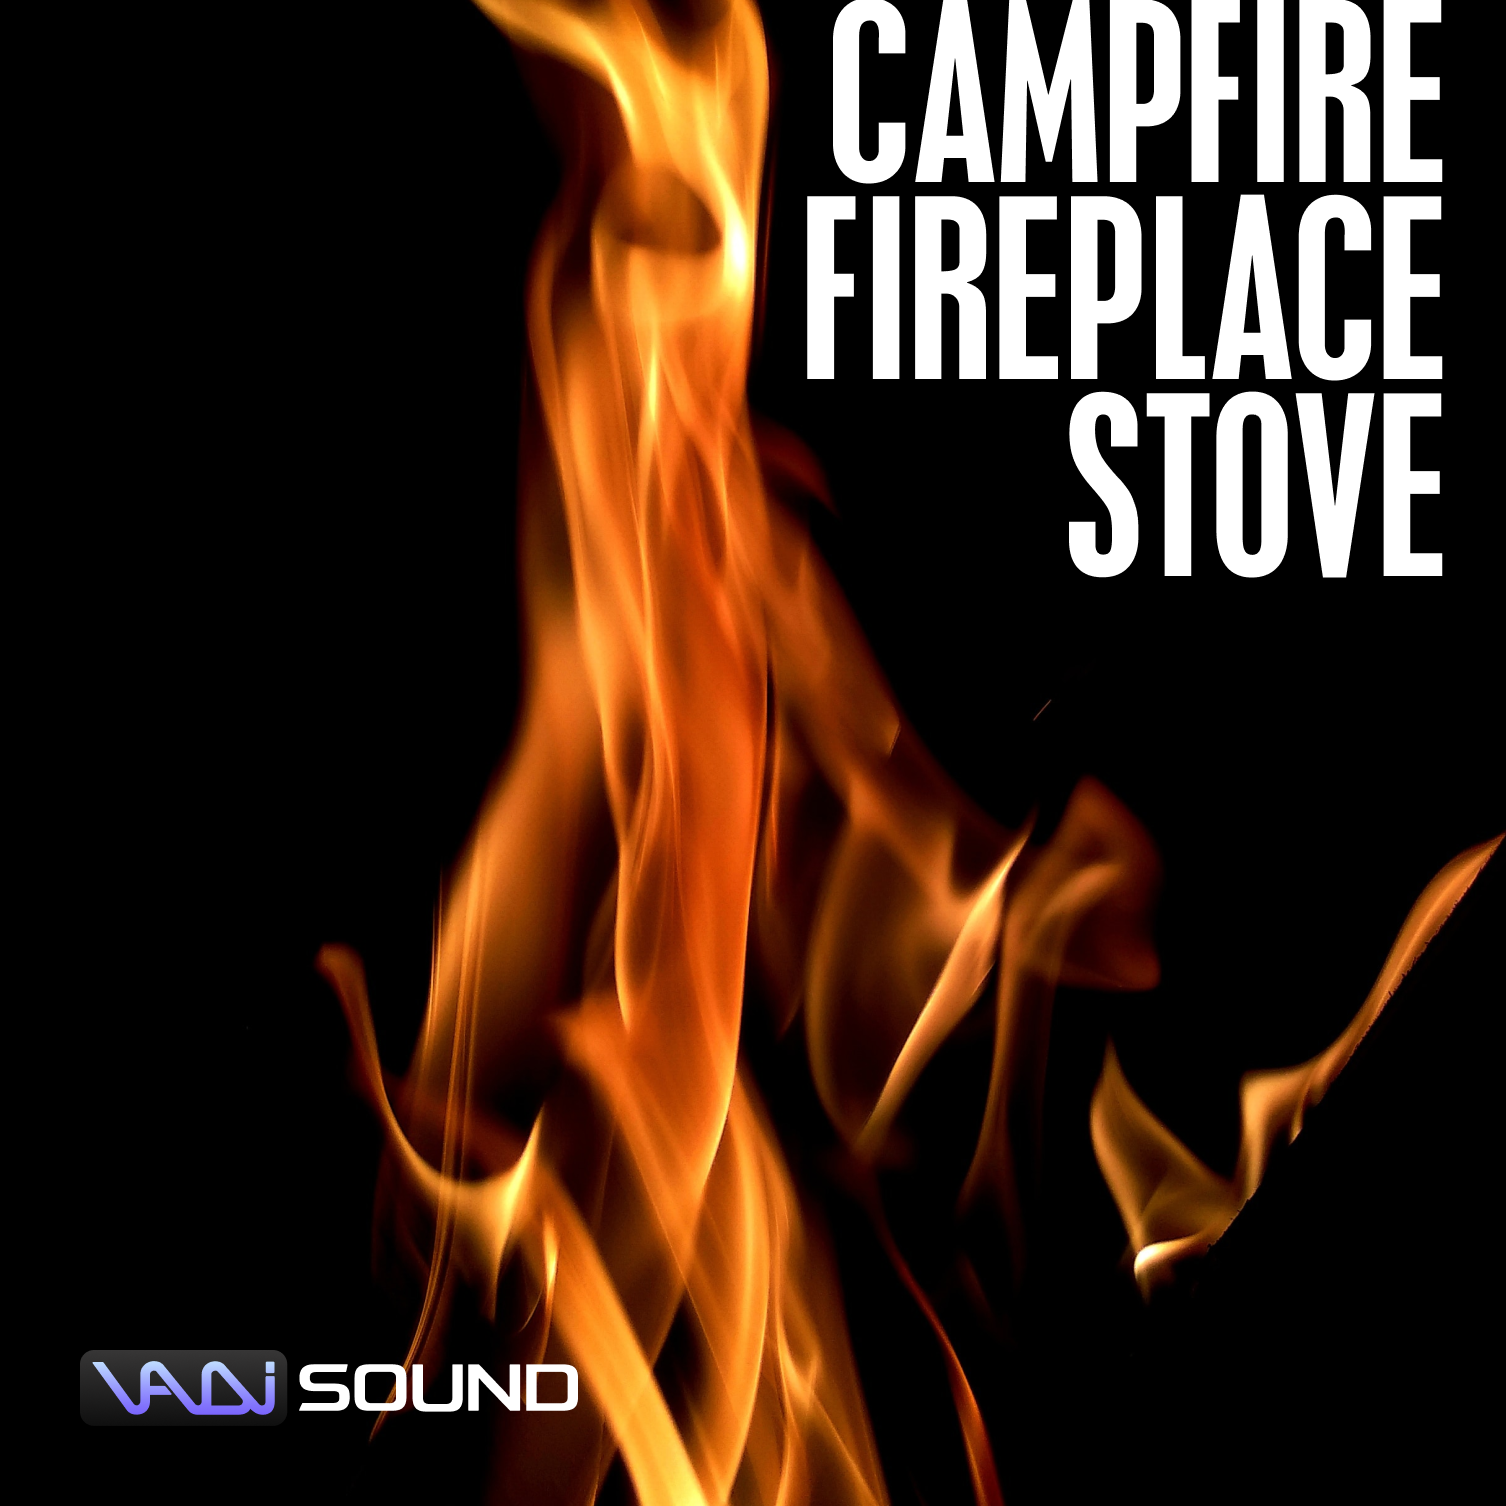 Campfire SFX Library showcased on Sonniss providing sound effects for fireplace stove.